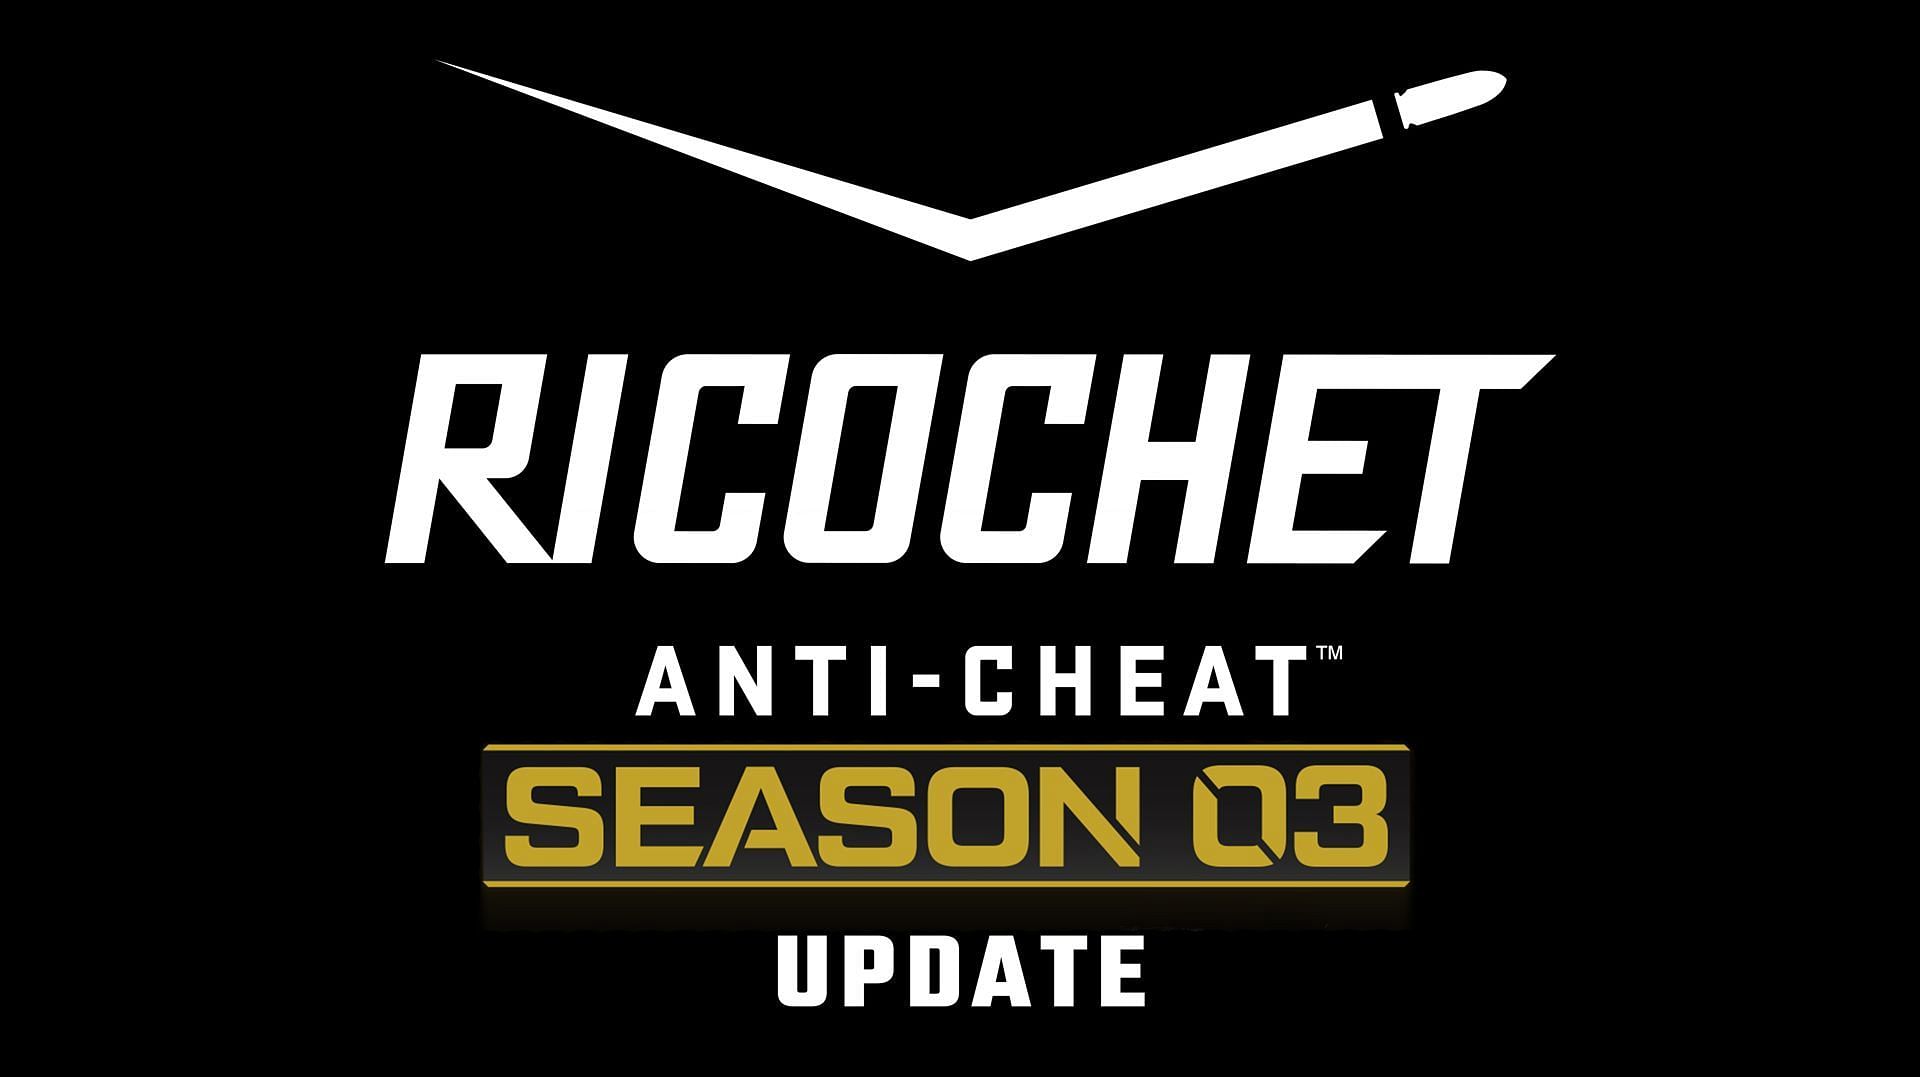 More secured Ricochet Anti-Cheat update (Image via Activision)